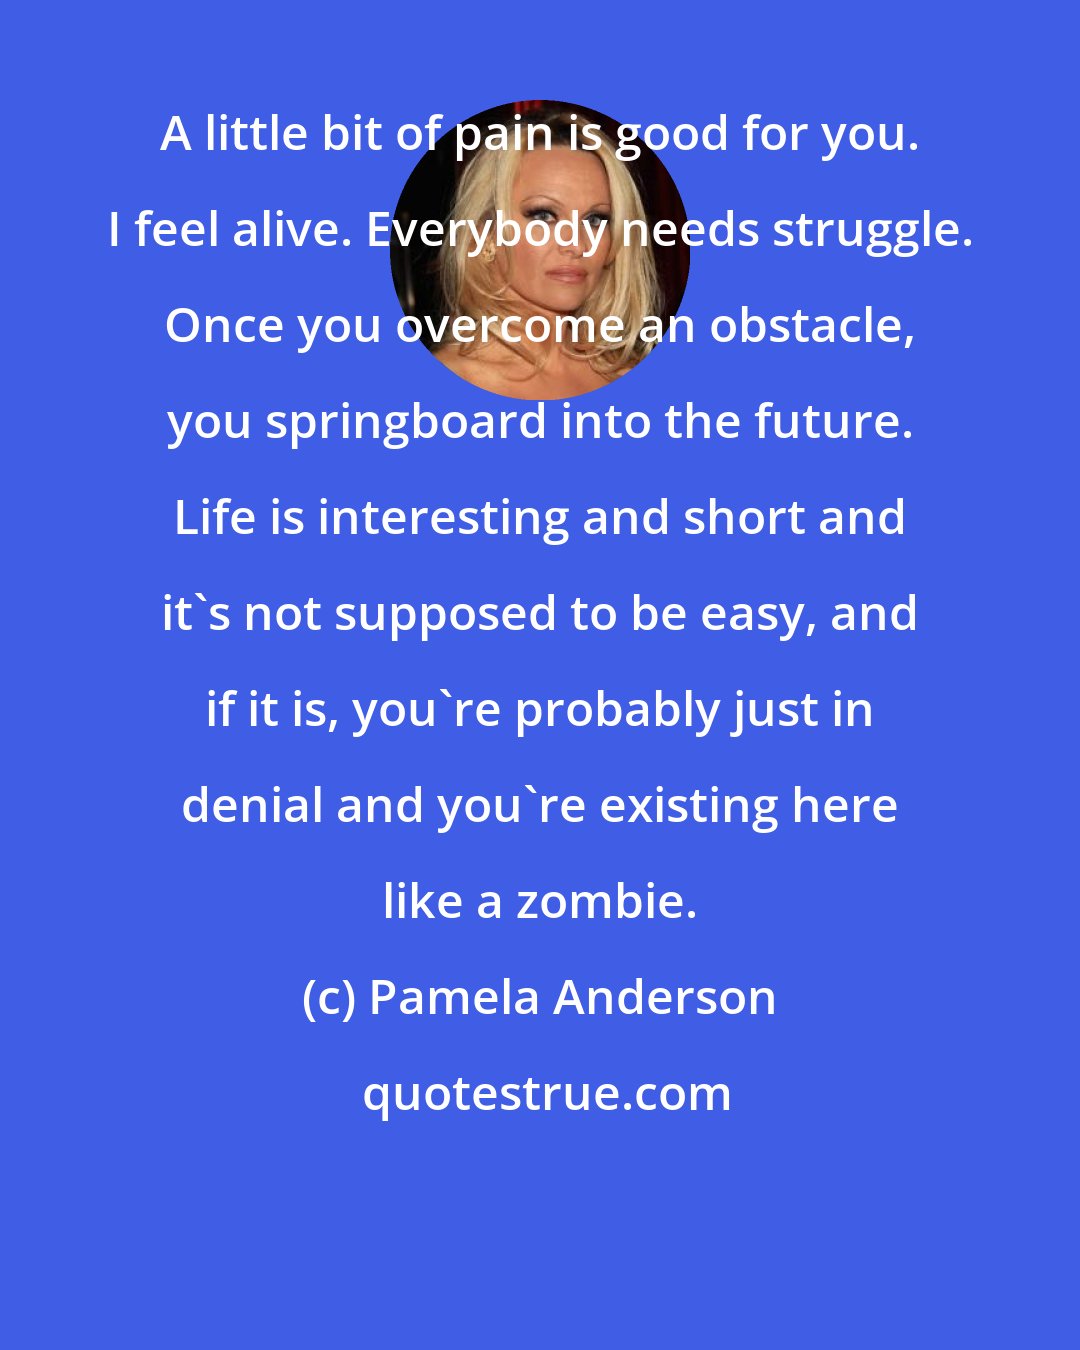 Pamela Anderson: A little bit of pain is good for you. I feel alive. Everybody needs struggle. Once you overcome an obstacle, you springboard into the future. Life is interesting and short and it's not supposed to be easy, and if it is, you're probably just in denial and you're existing here like a zombie.